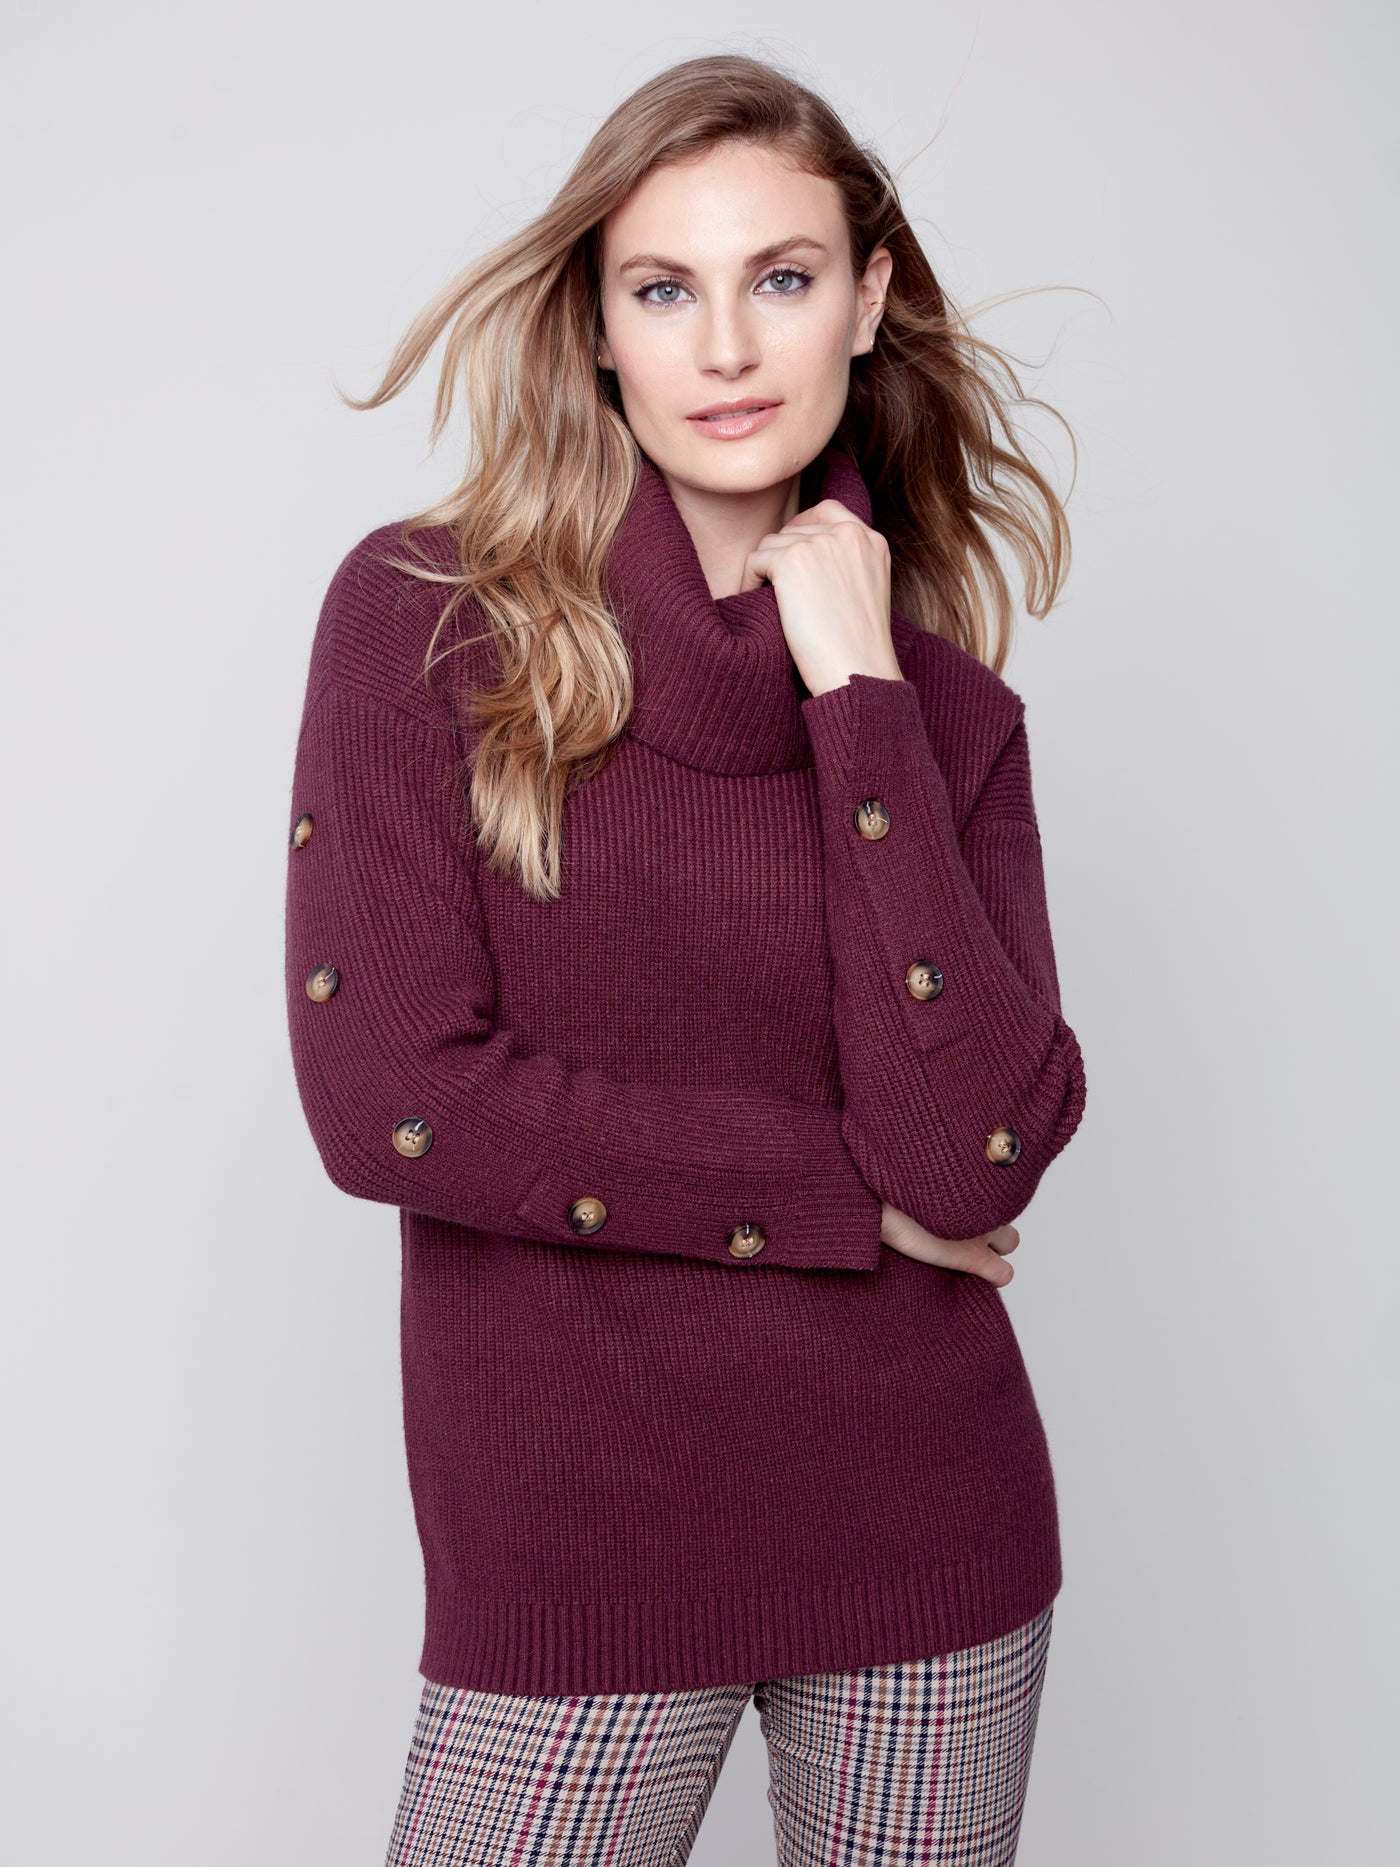 Charlie B Top - Button Sleeve Sweater - Port